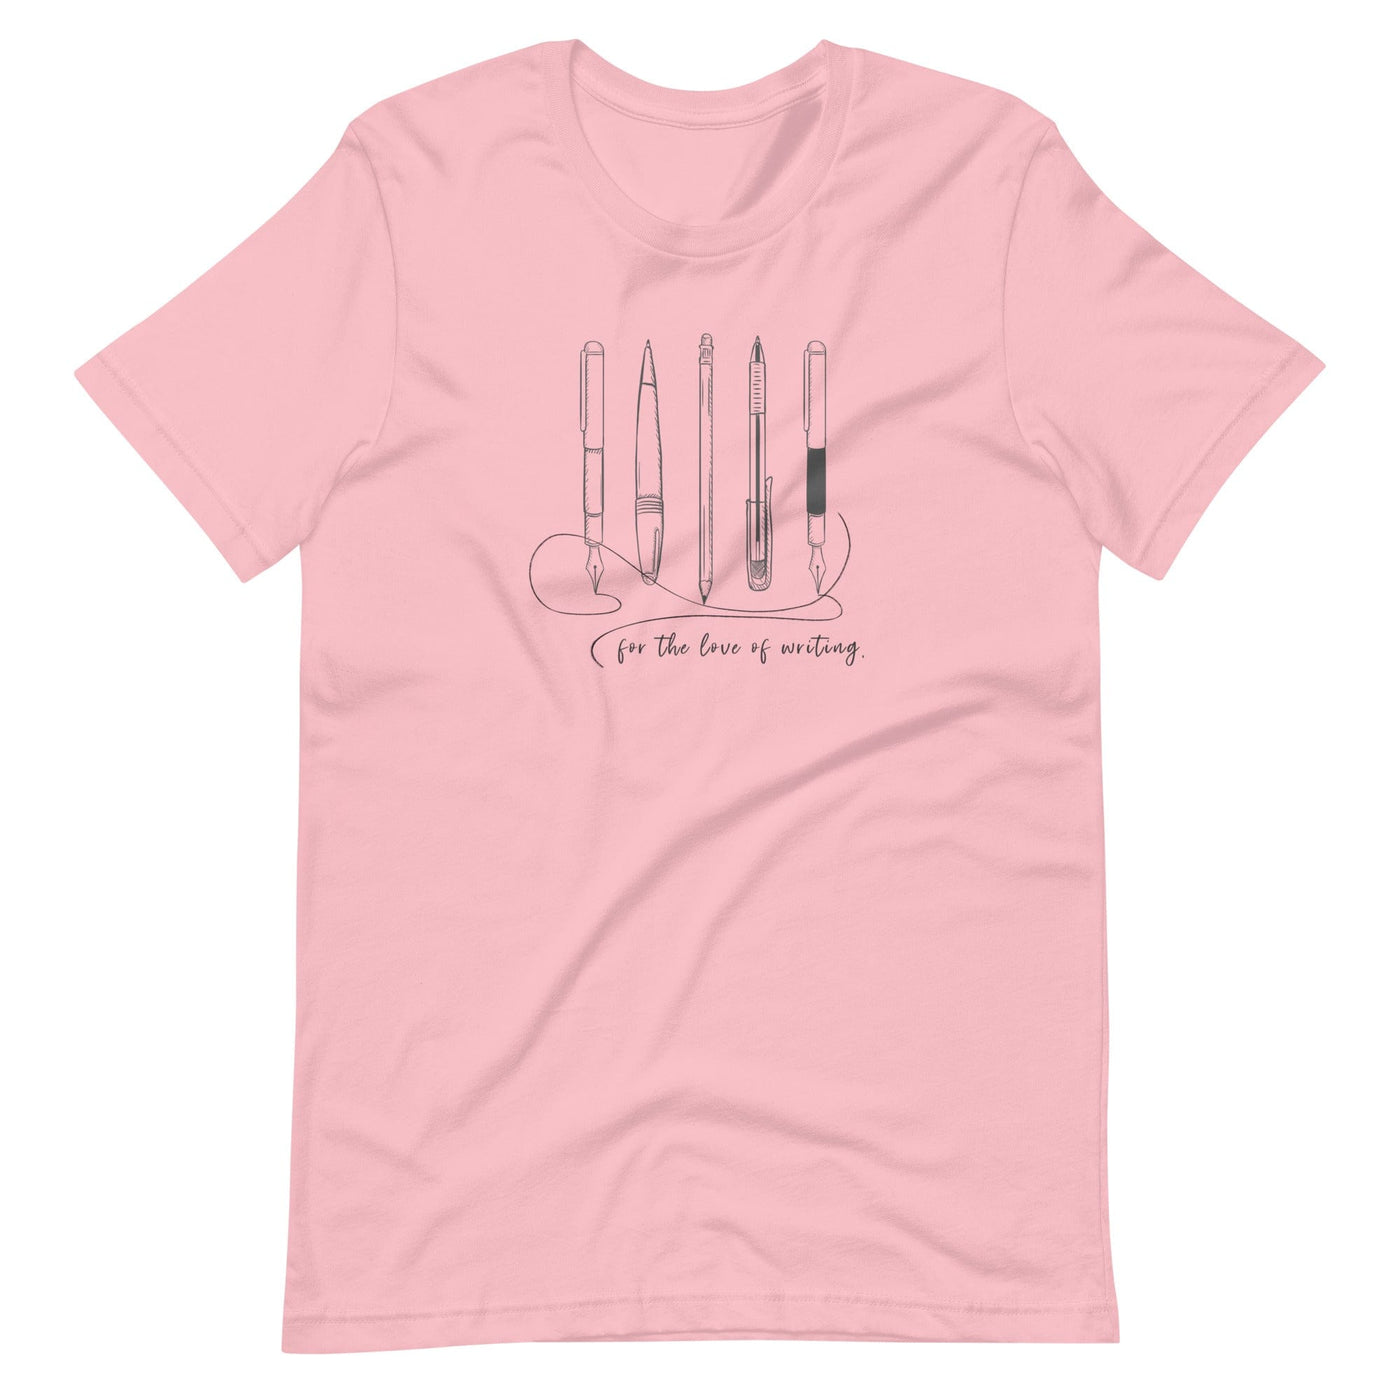 Lit Haven Booktique T-Shirt Pink / S For the Love of Writing tee